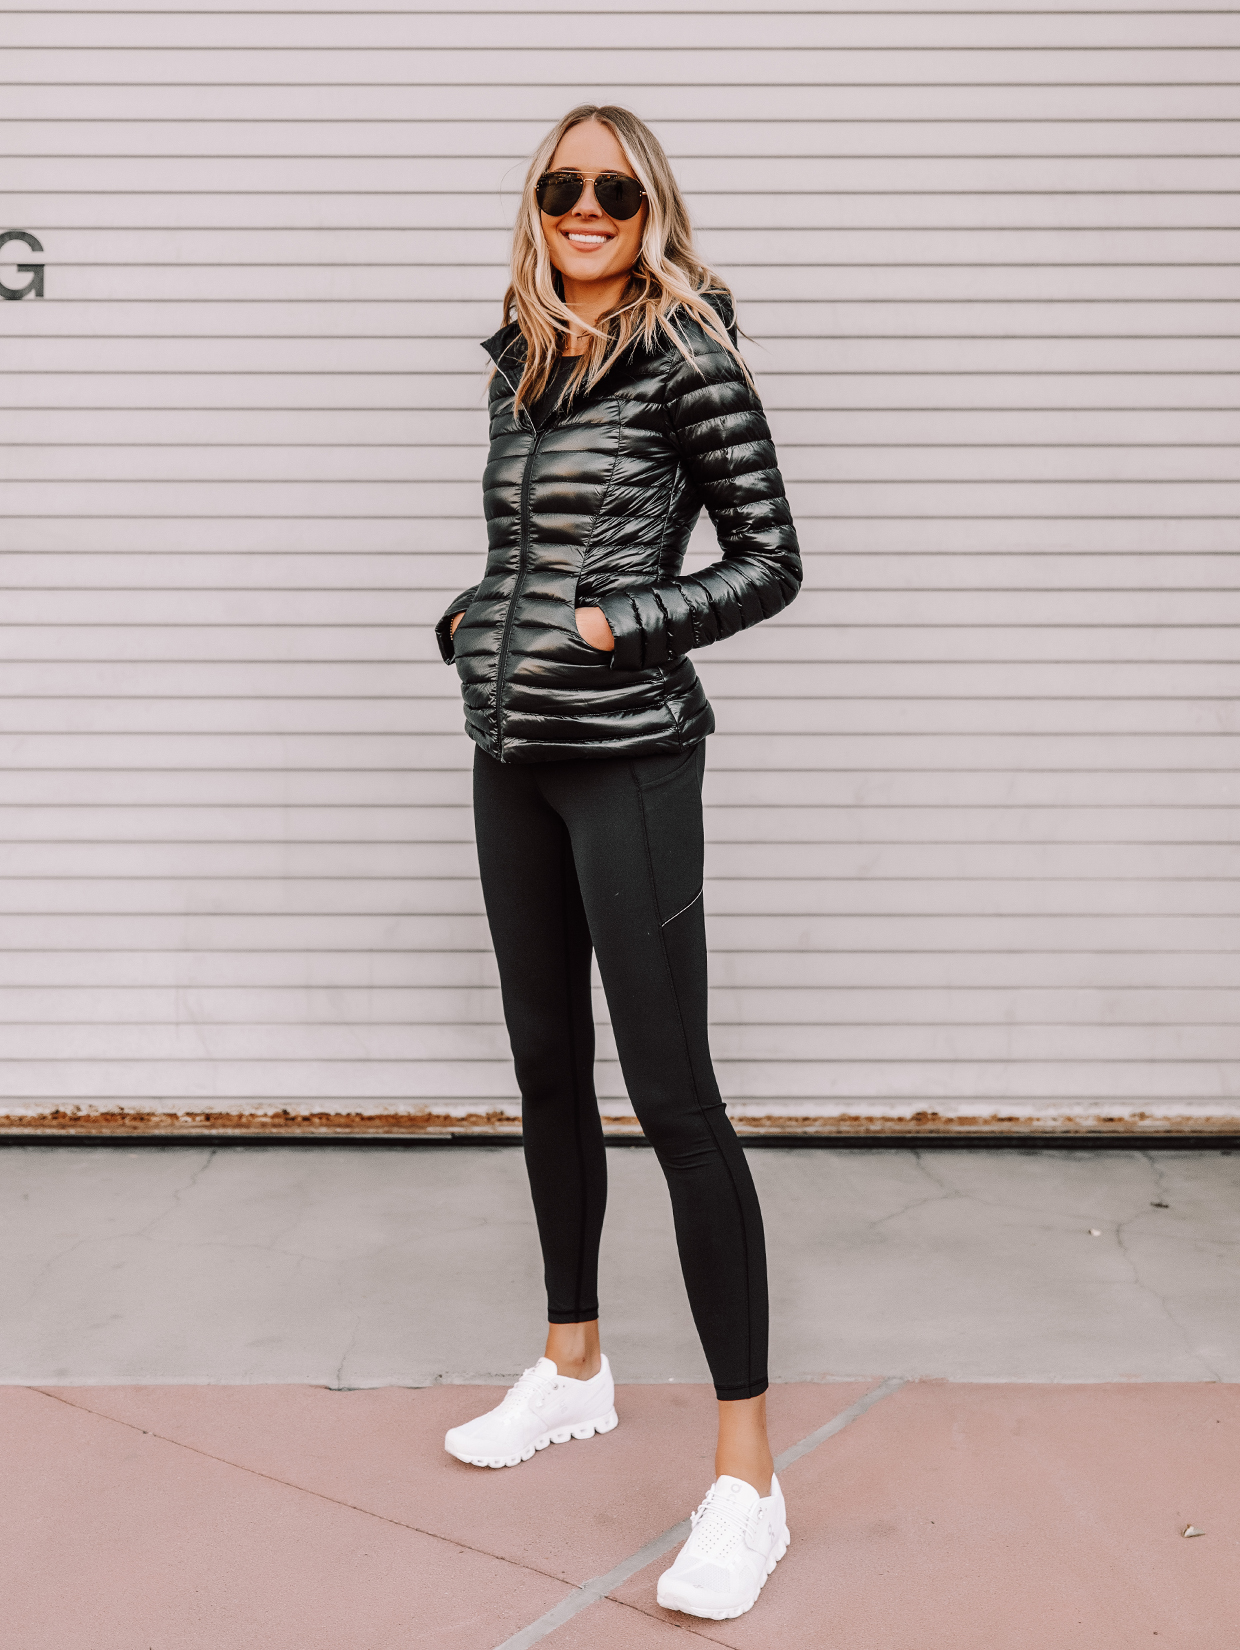 A Leather Jacket With Leather Look Leggings – FORD LA FEMME